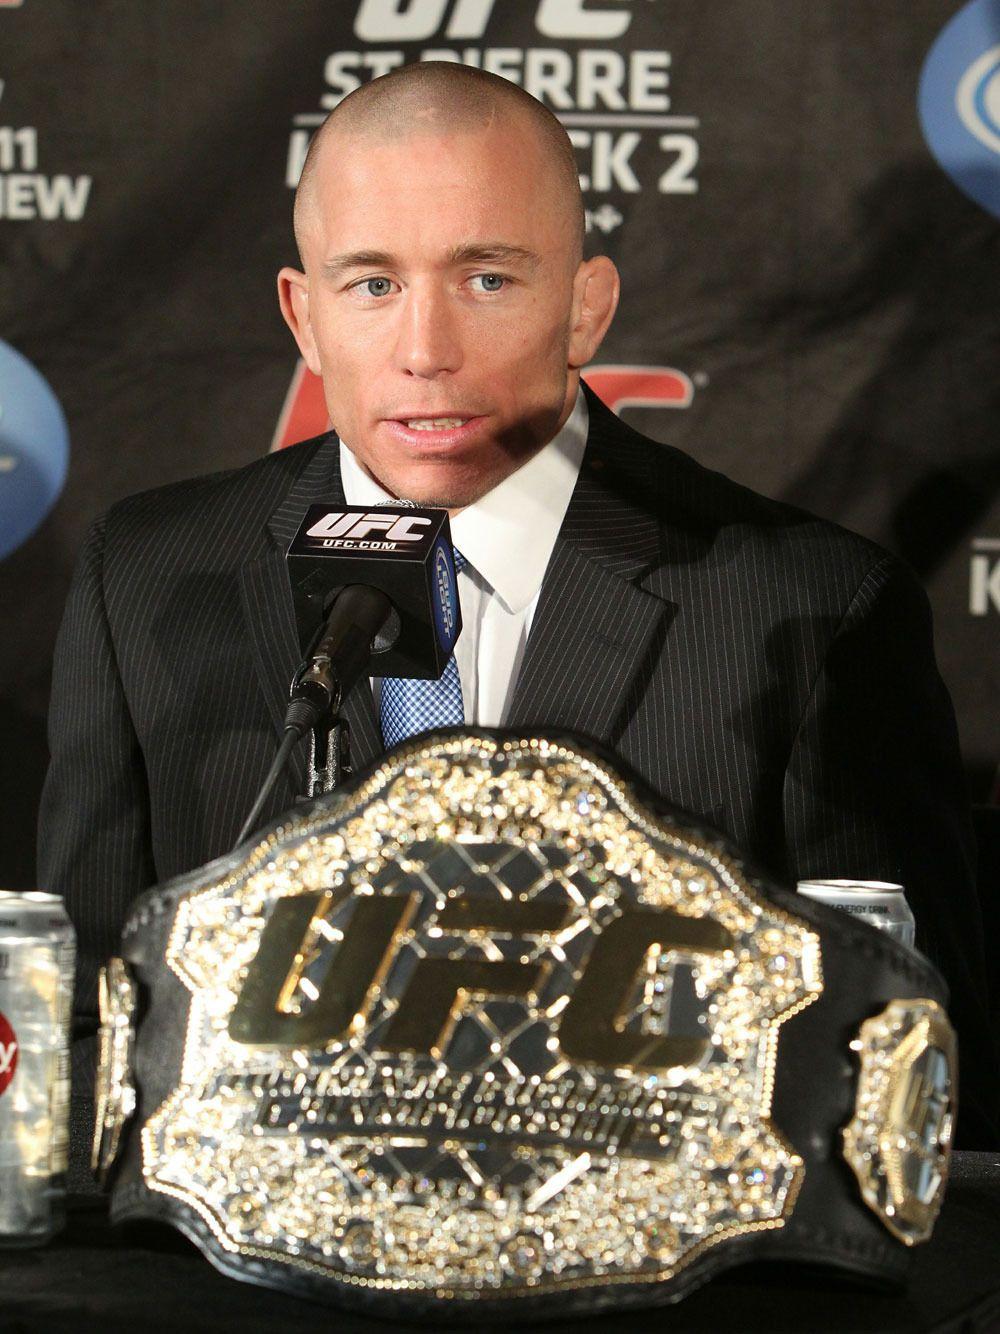 Gsp Mma Ufc Press Conference Wallpaper 1000x1334 px Free Download